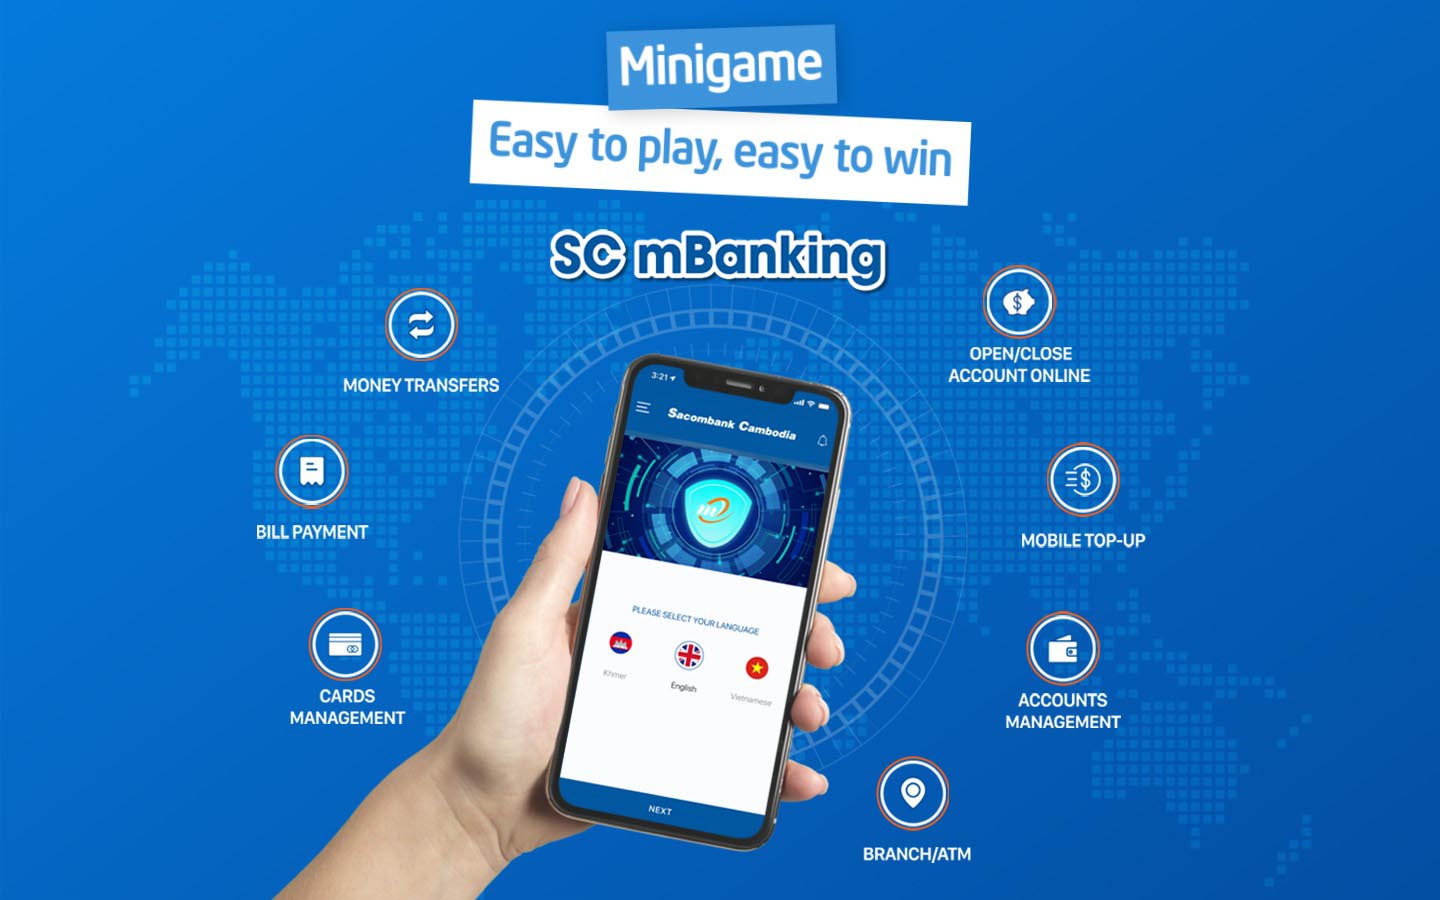 Minigame Facebook 2020 - Easy to Play, Easy to Win